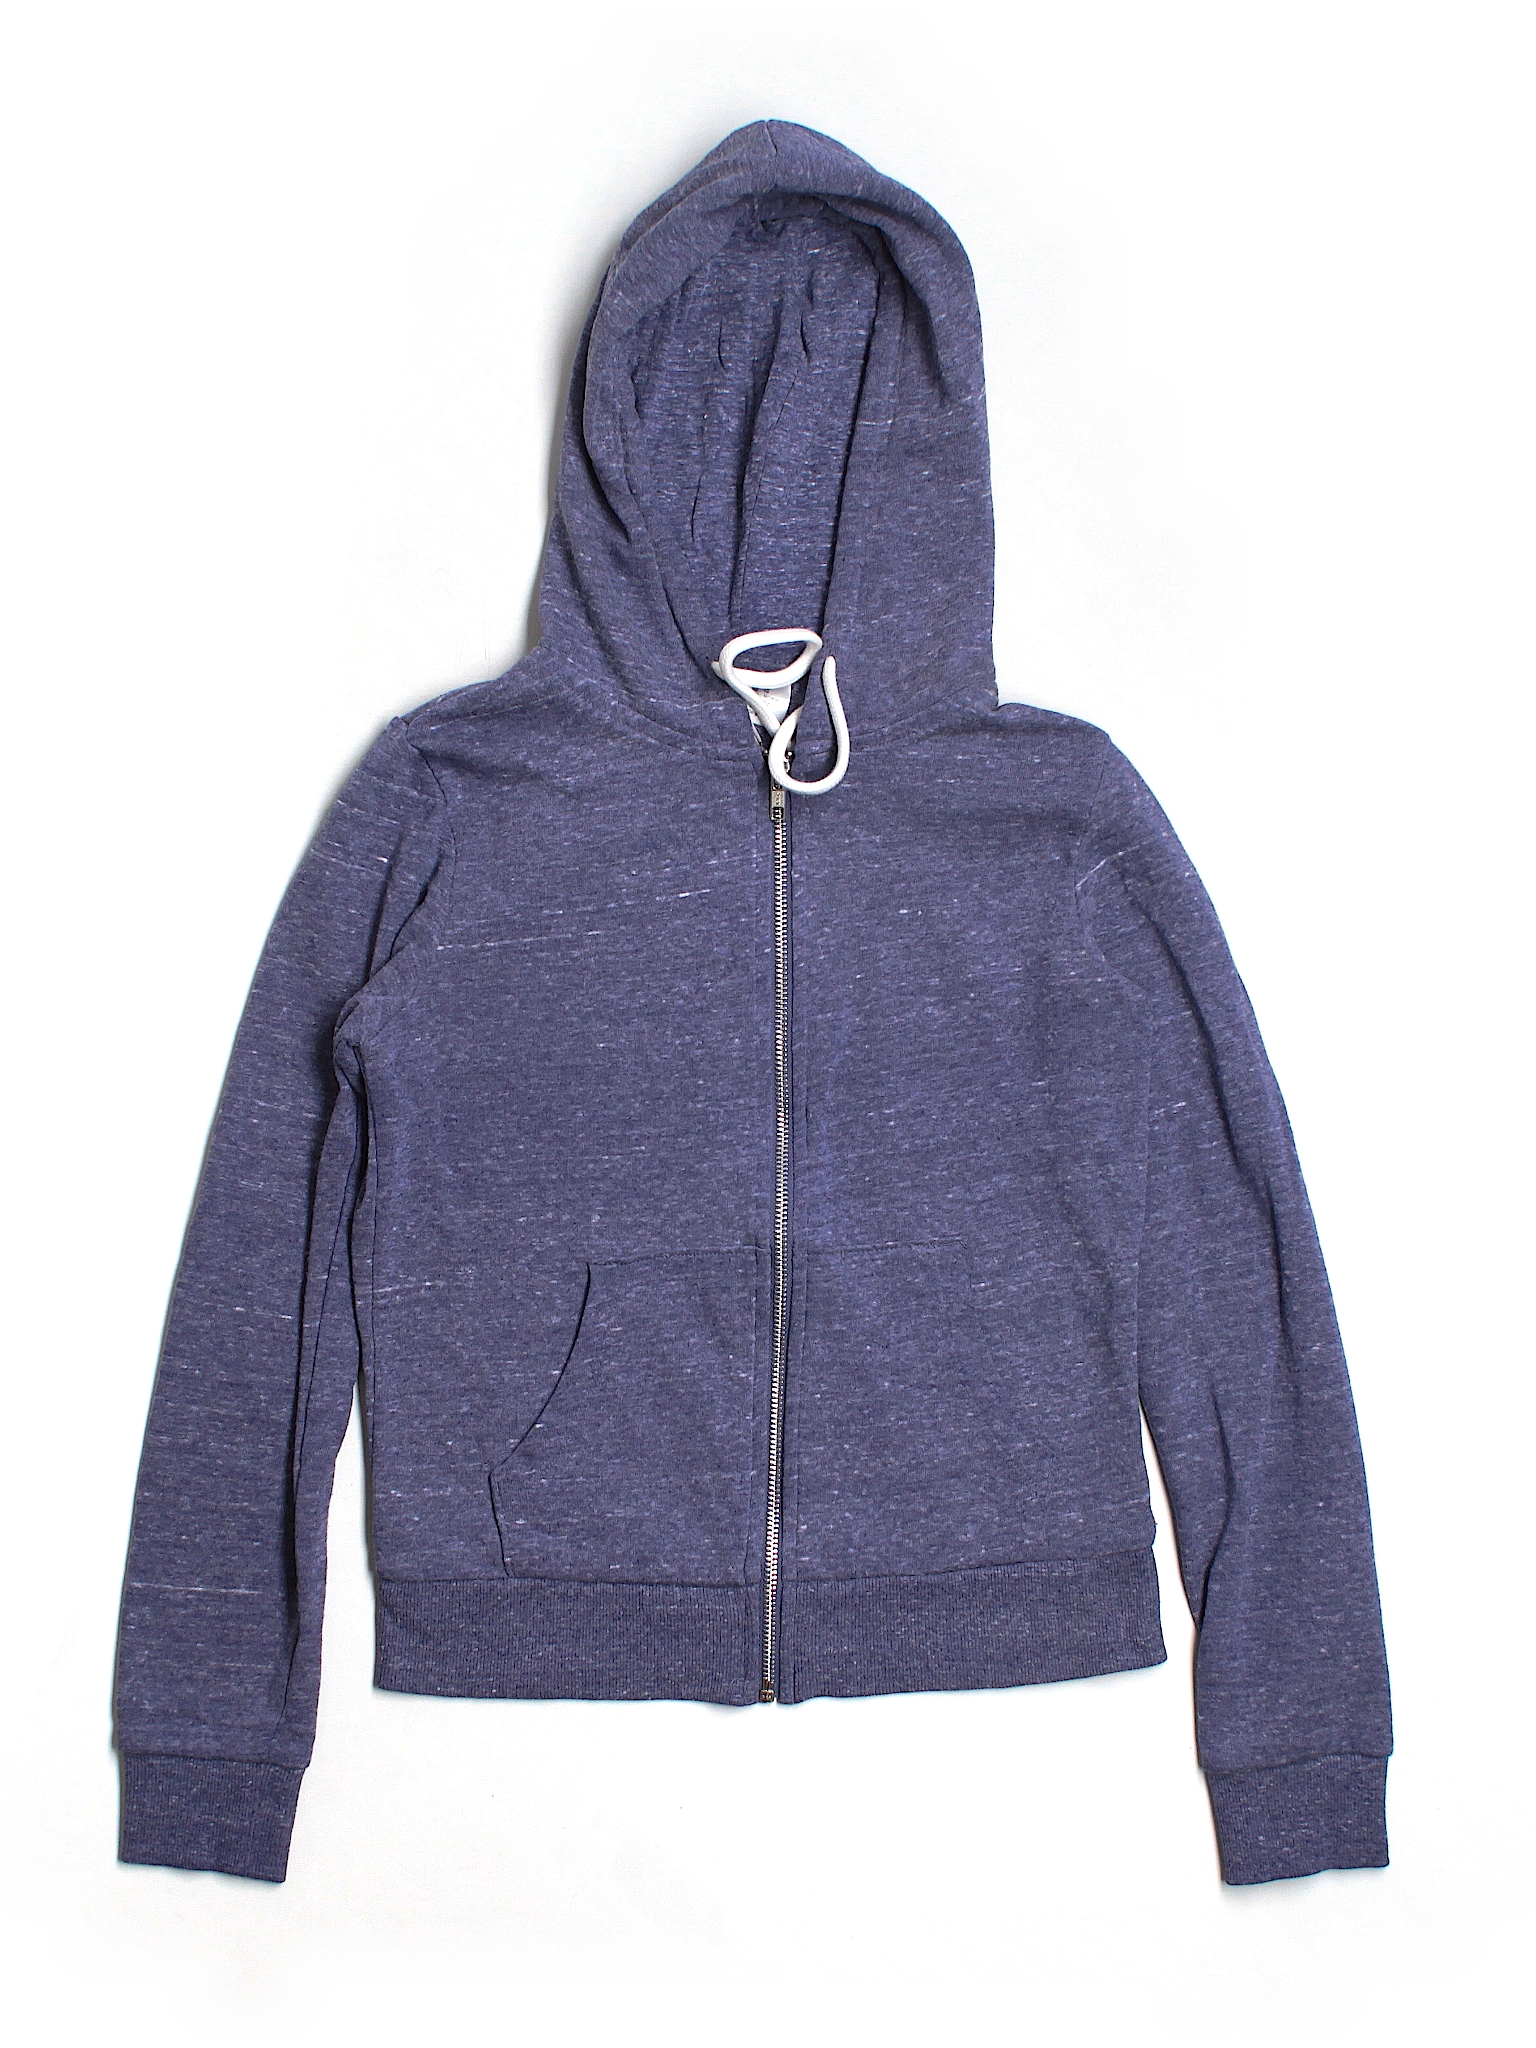 Divided by H&M 100% Cotton Solid Purple Zip Up Hoodie Size XS - 70% off ...